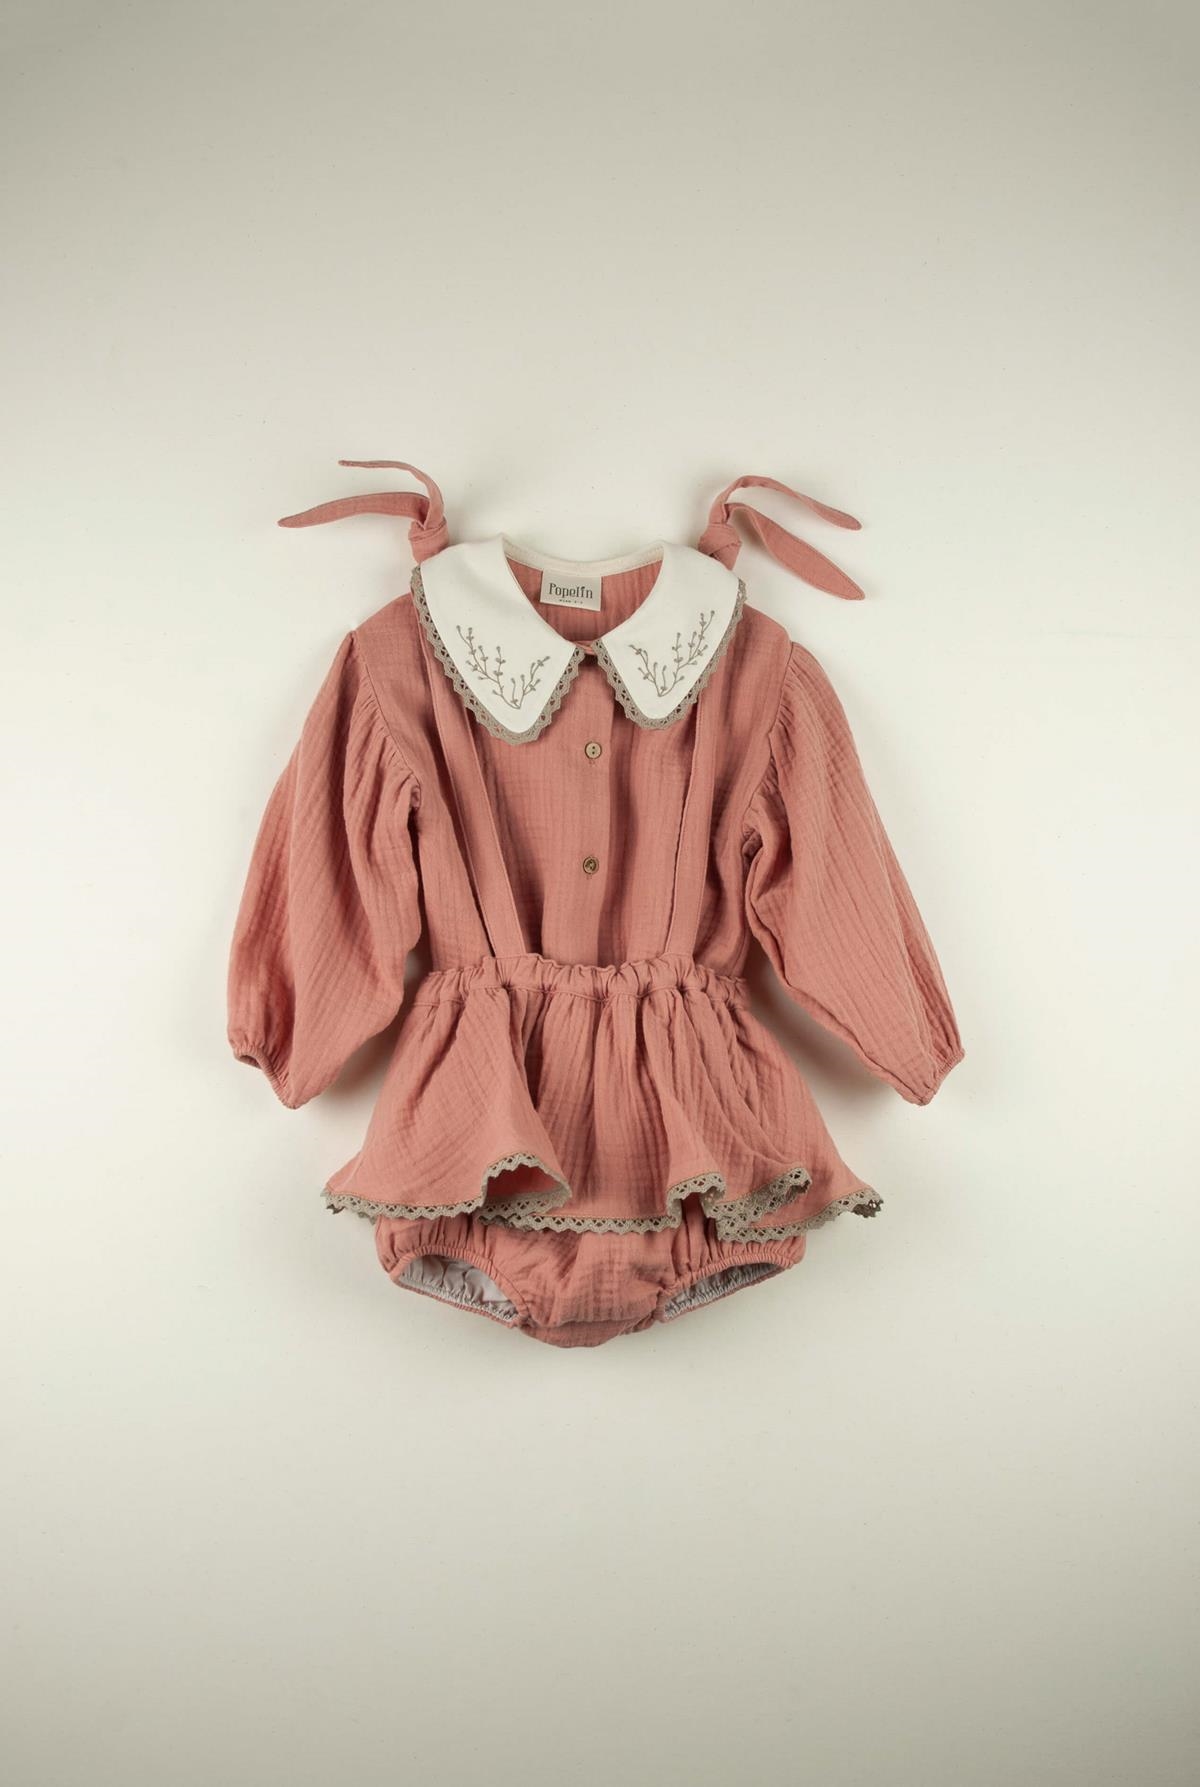 Mod.4.2 Skirted pink romper suit | AW21.22 Mod.4.2 Skirted pink romper suit | 1